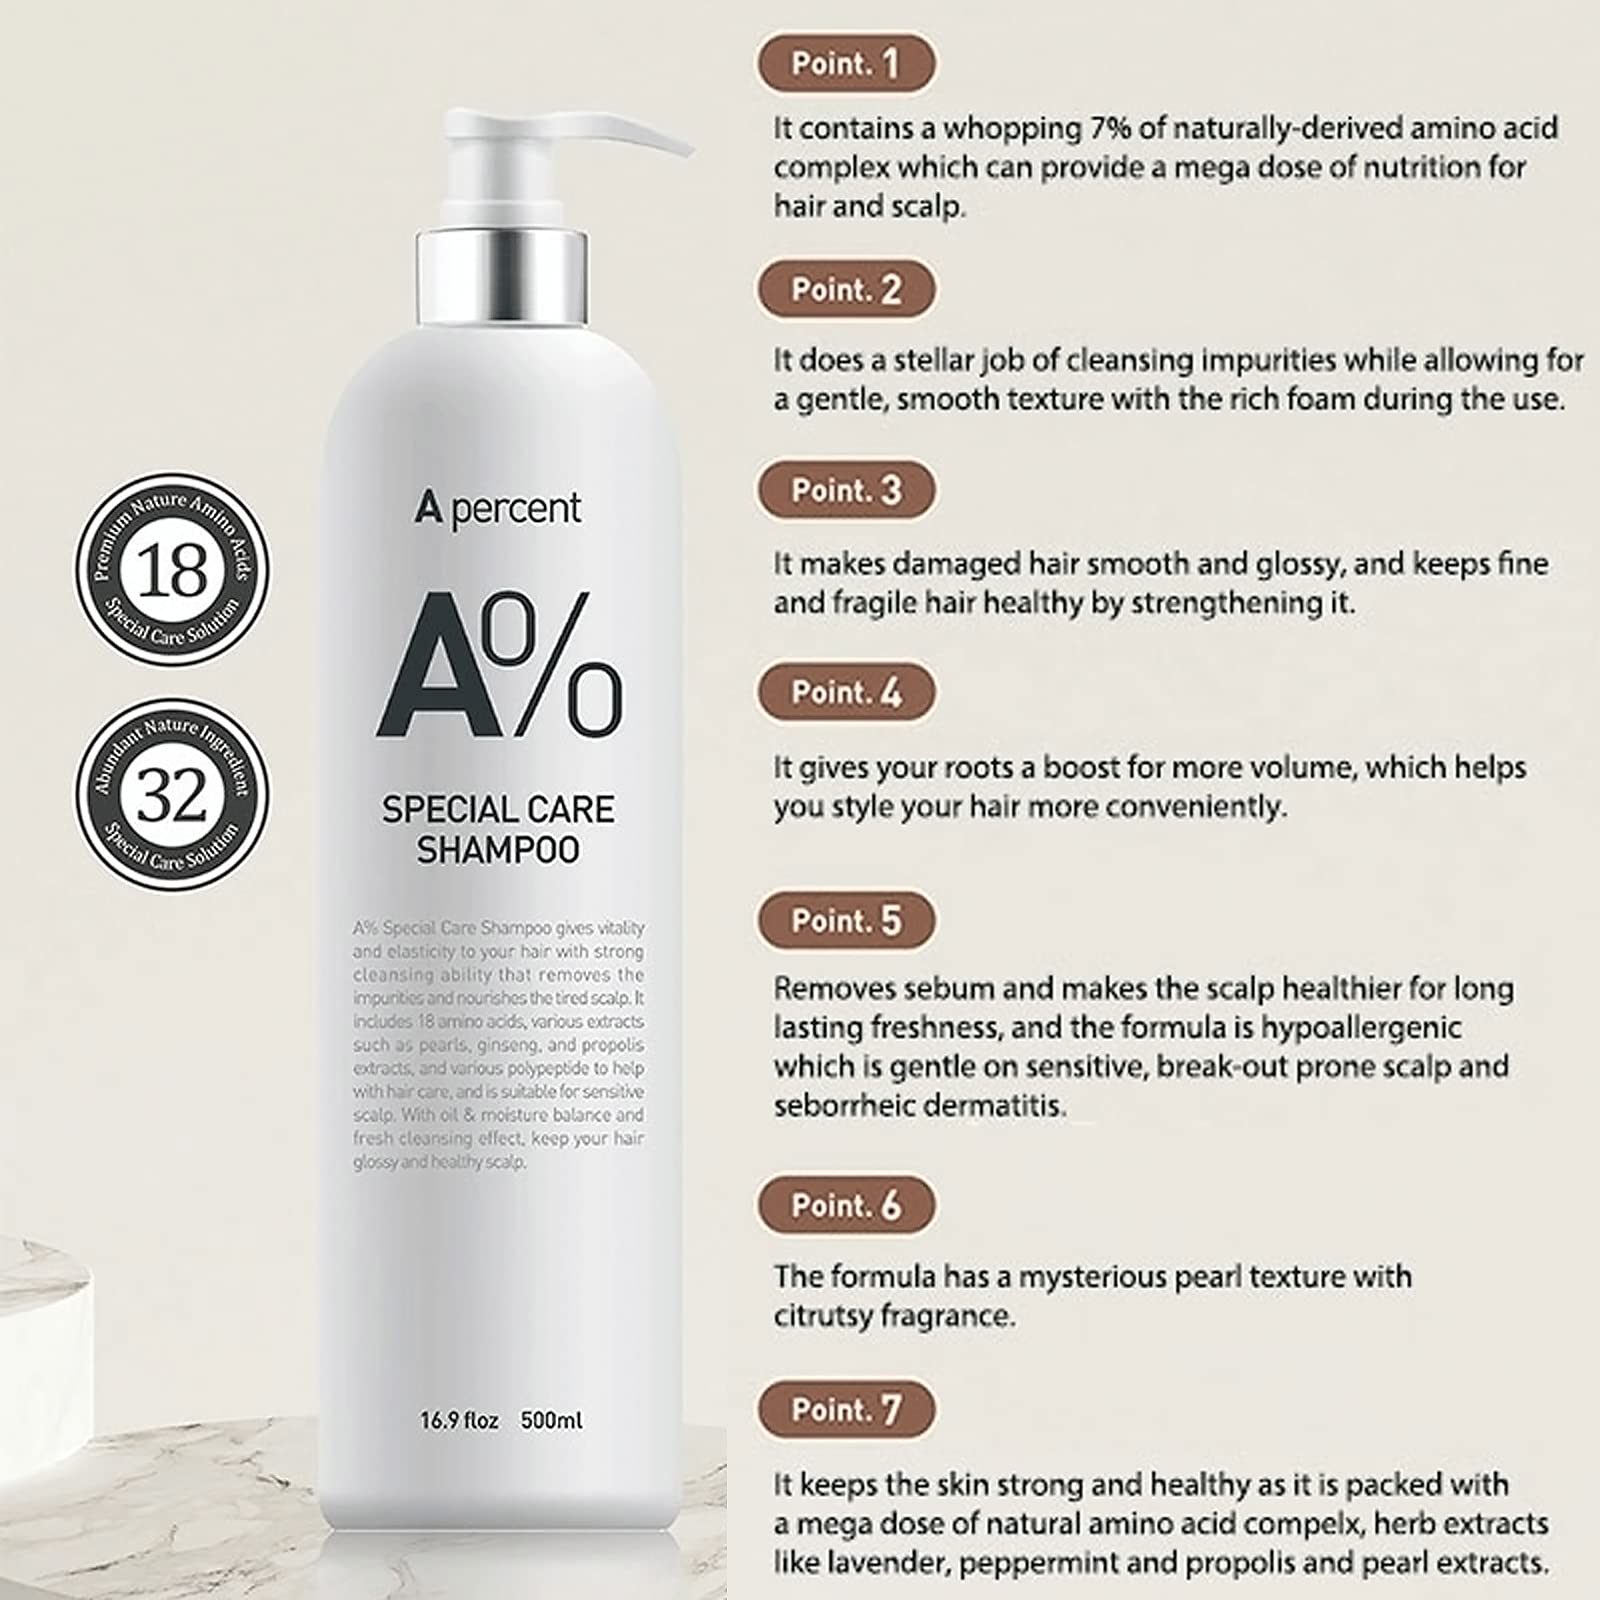 A% Special Care Shampoo 500ml (16.9 Fl.Oz) | Contains Amino Acid & Peptides | Deep Cleansing & Hypoallergenic | Natural-derived Ingredients | Rich & Soft Foam